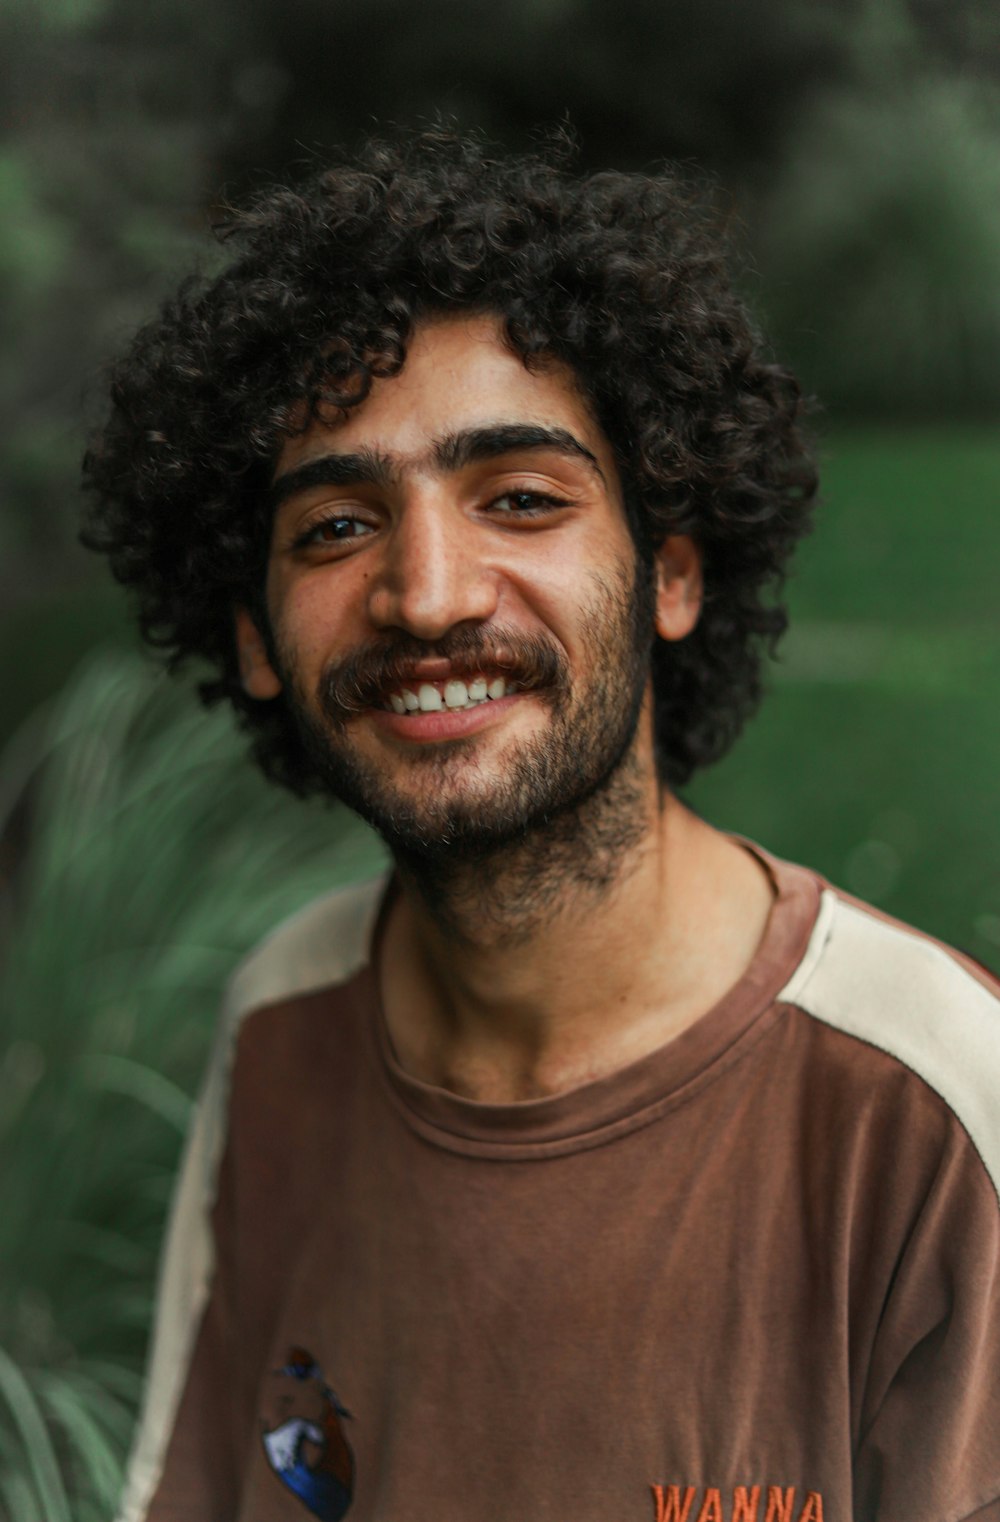 a man with curly hair and a beard smiling